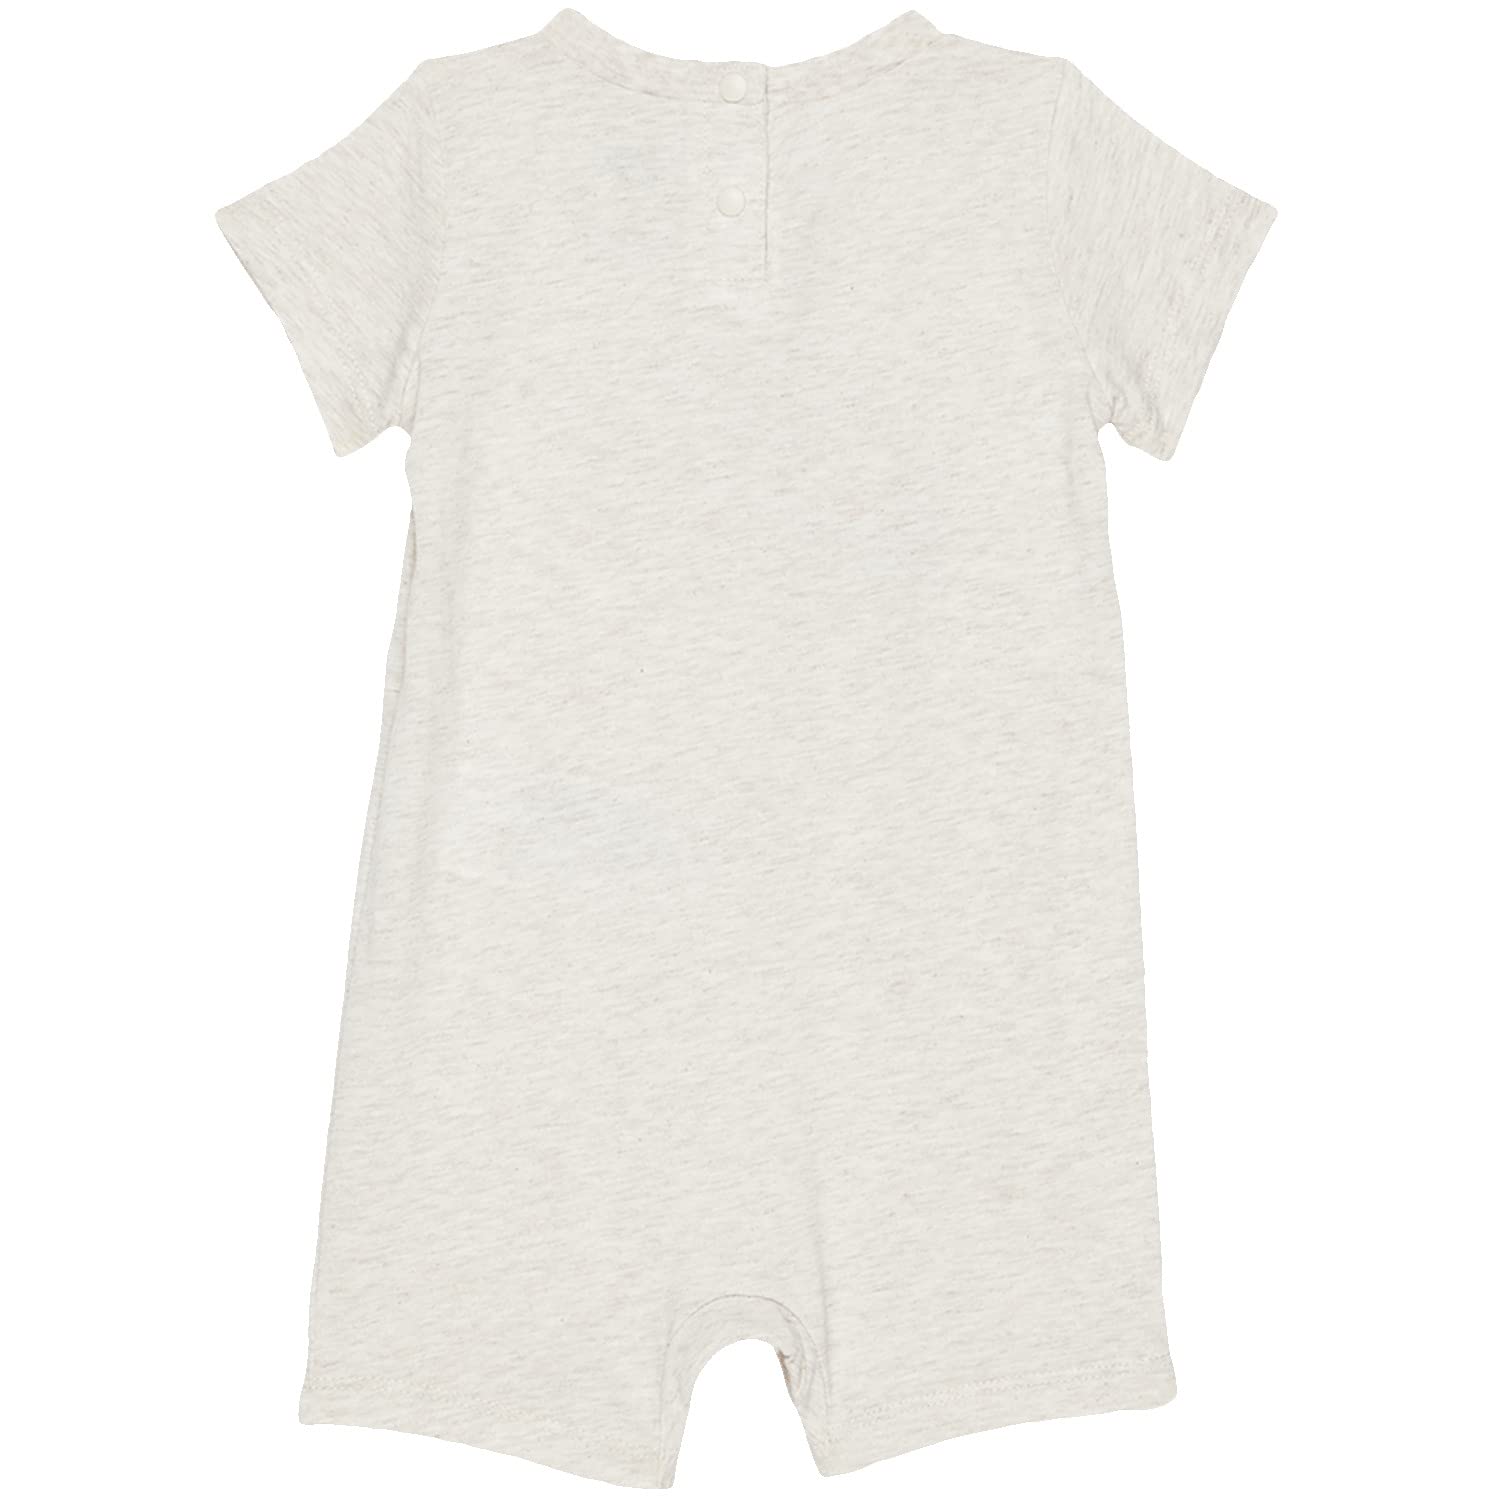 Image 2 of Fruits Graphic Romper (Infant)